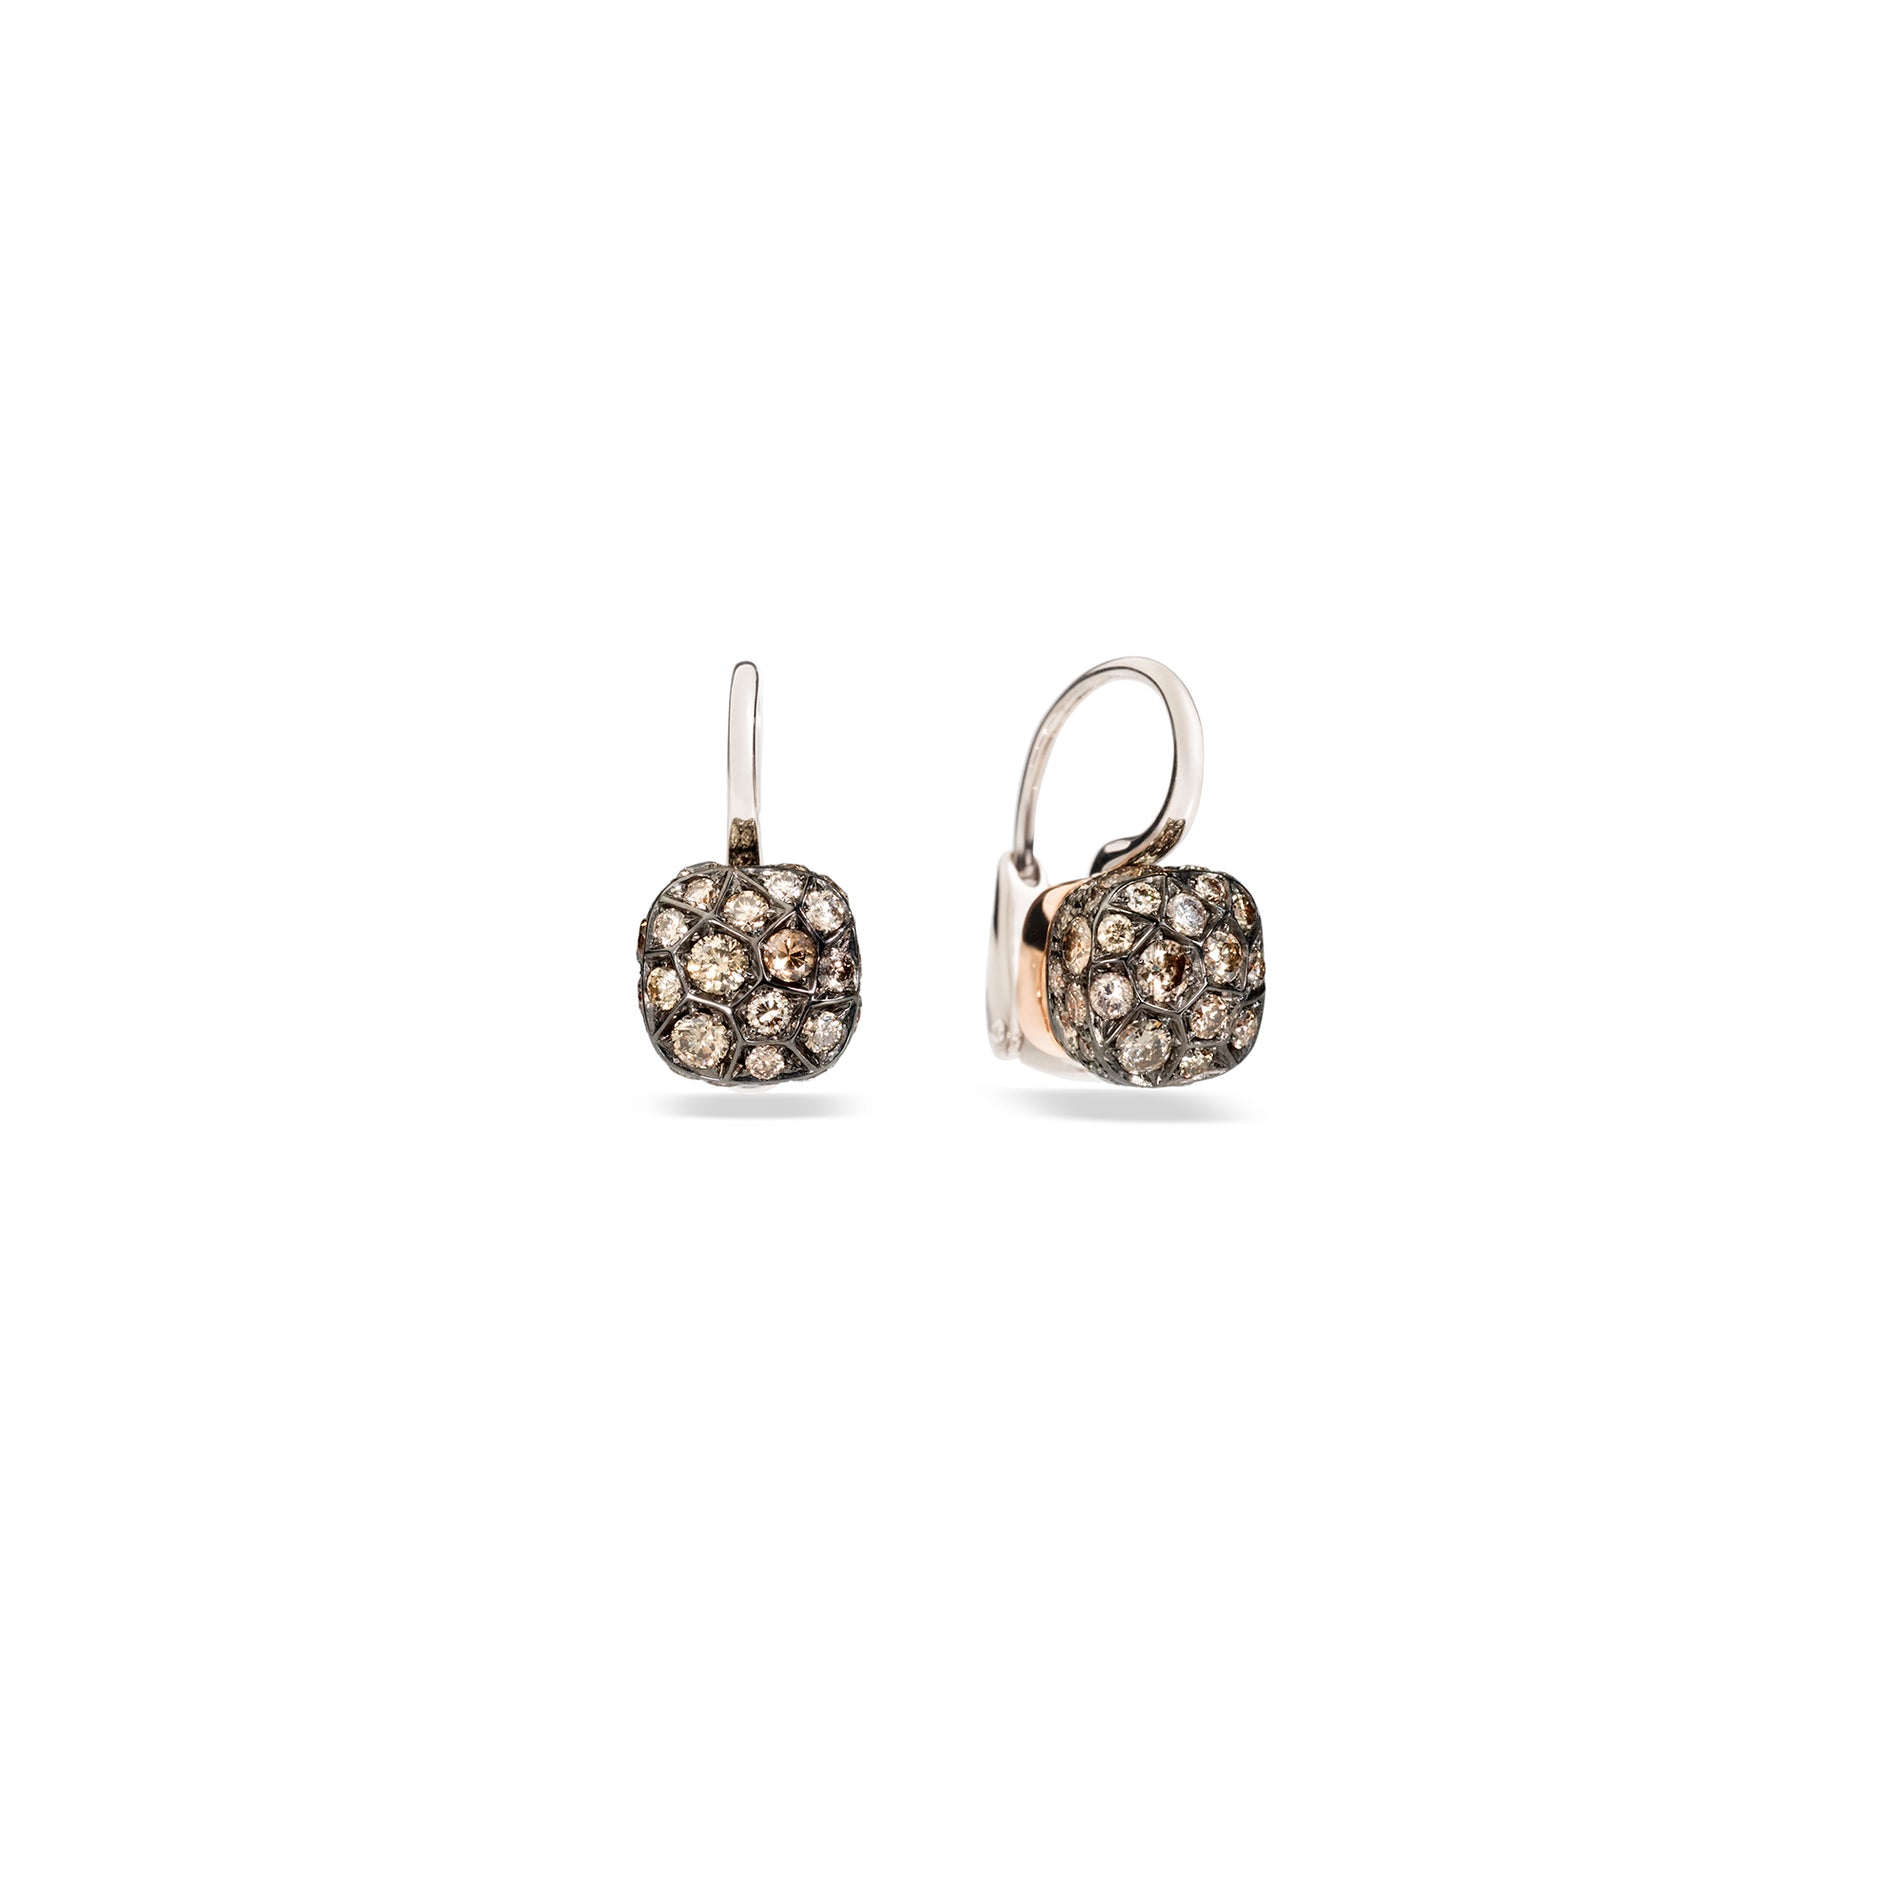 Nudo Petit Earrings in 18k Rose and White Gold with Brown Diamonds - Orsini Jewellers NZ